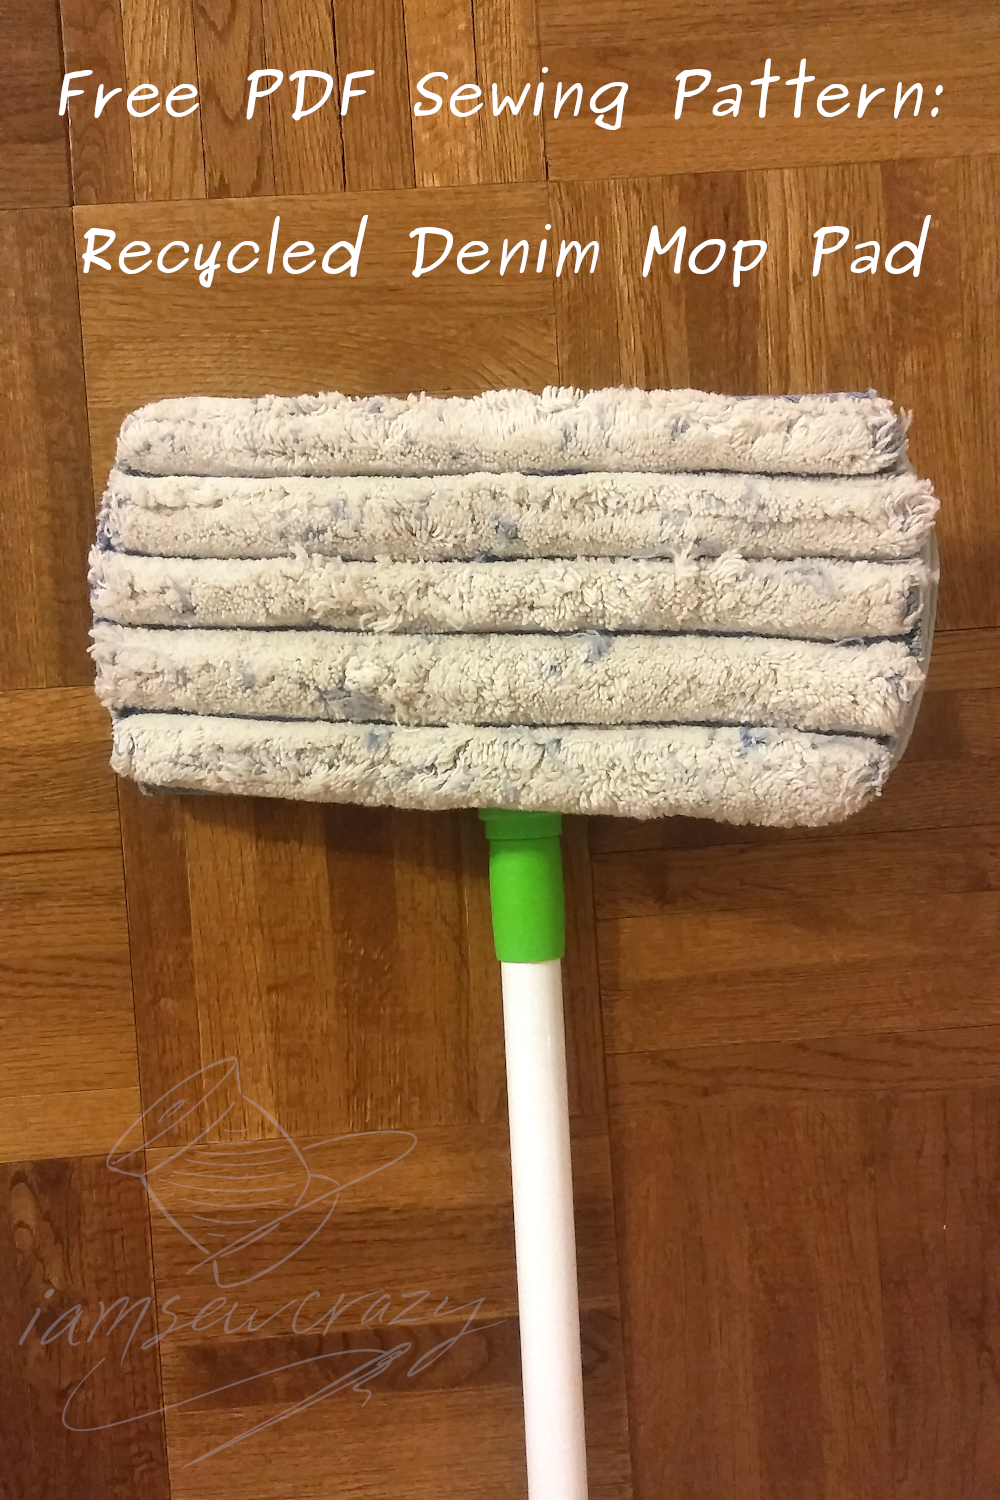 cotton chenille mop pad on parquet floor with text overlay: free PDF sewing pattern: recycled denim mop pad